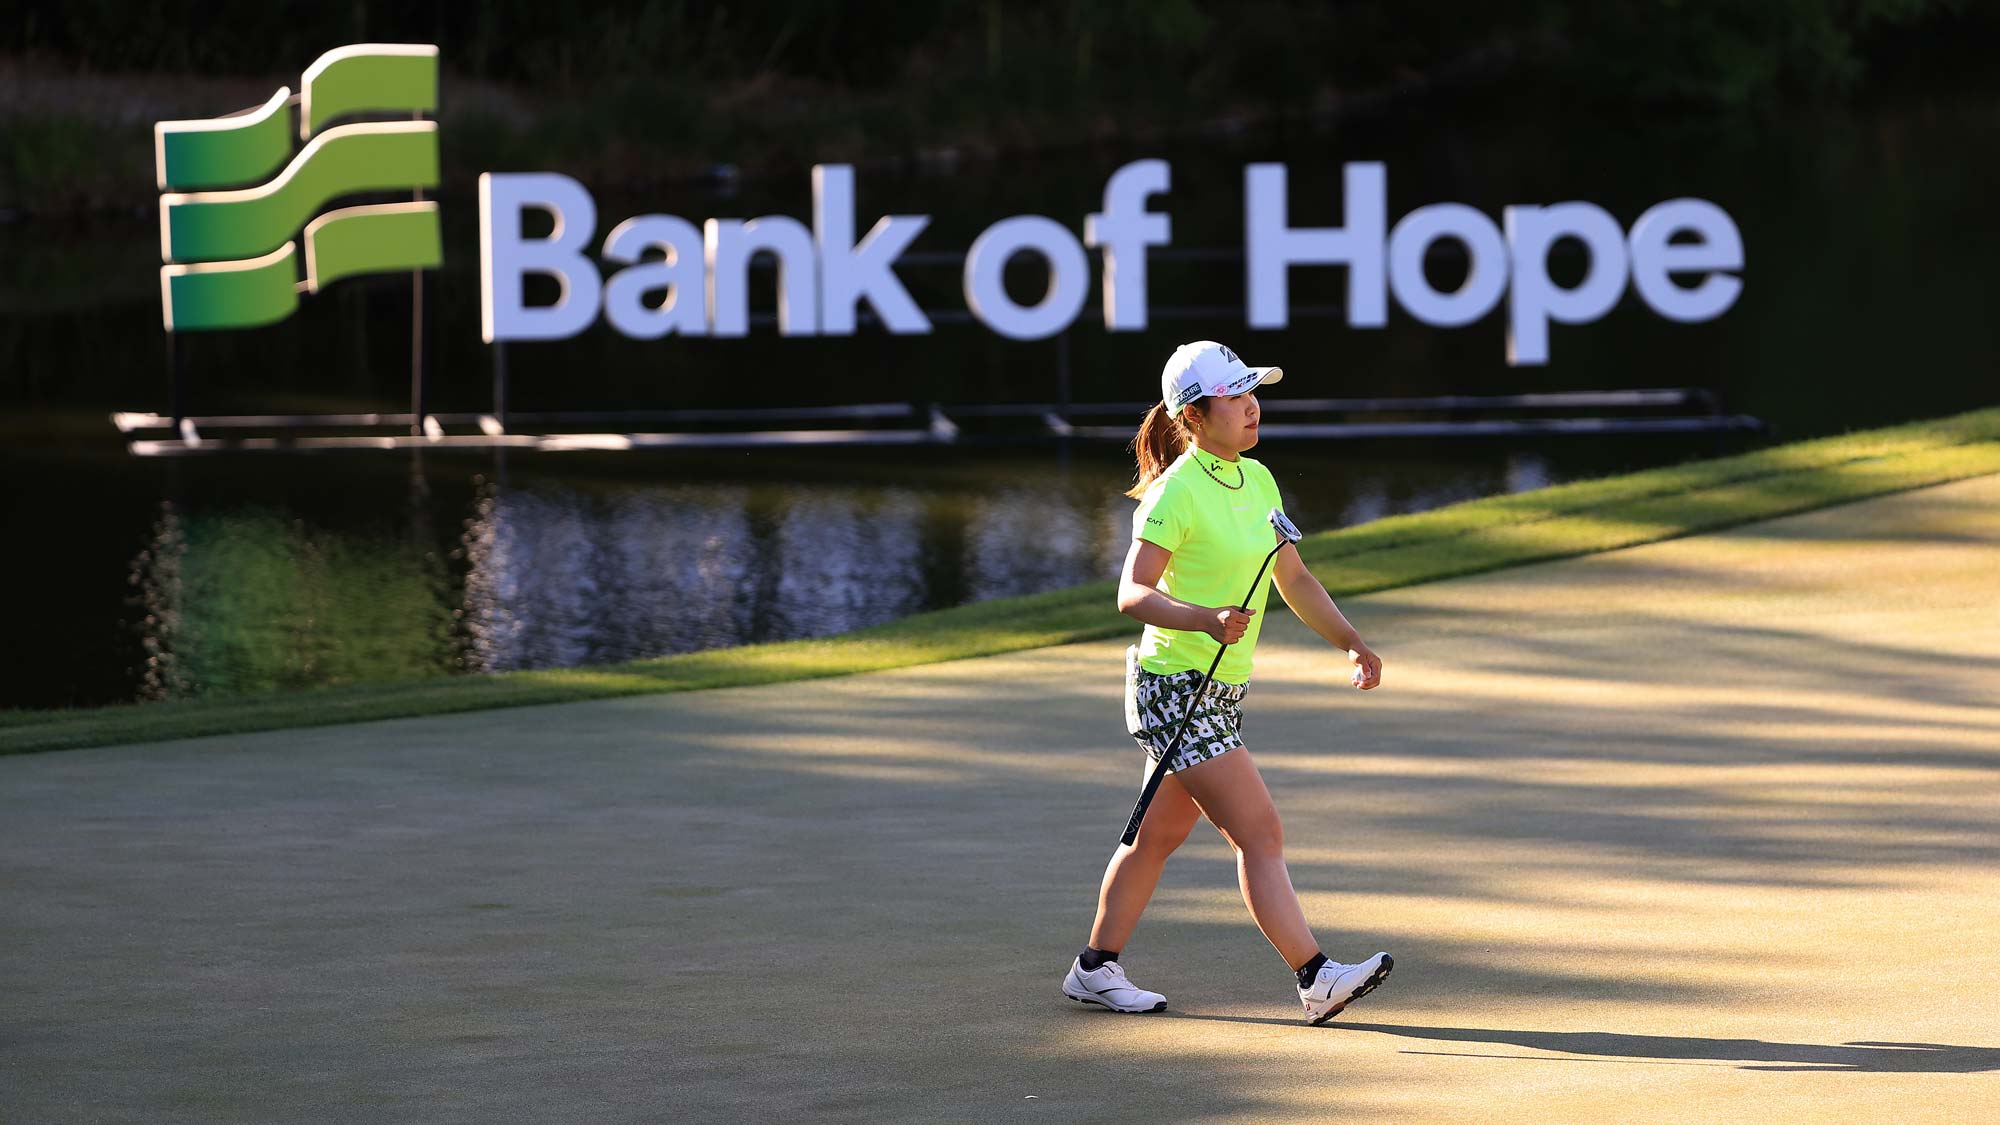 Ayaka Furue of Japan walks to her ball after missing a putt on the 16th green during the Bank of Hope LPGA Match-Play Hosted by Shadow Creek